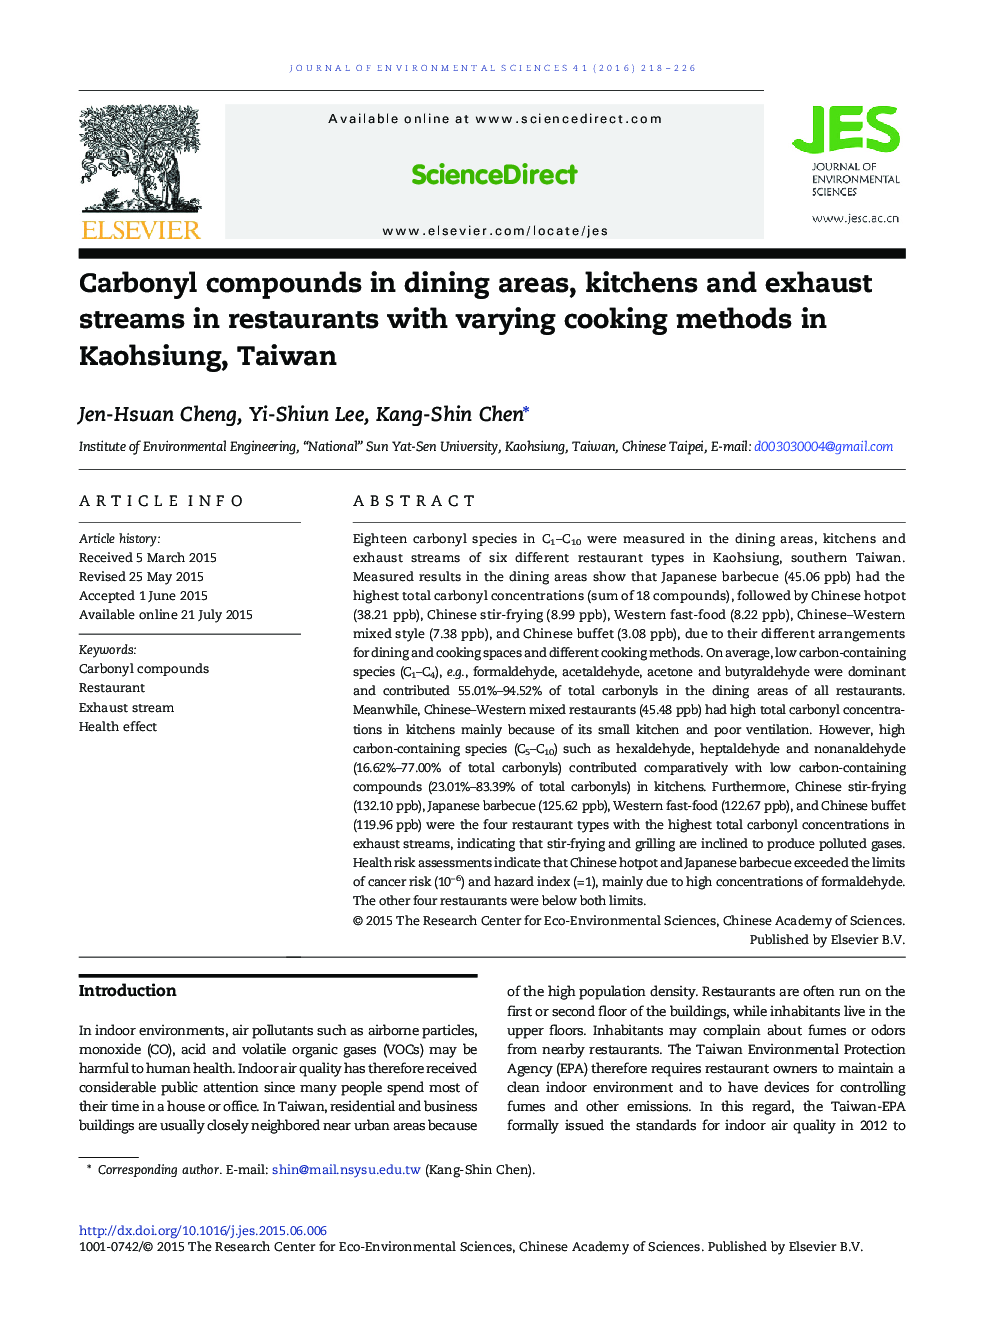 Carbonyl compounds in dining areas, kitchens and exhaust streams in restaurants with varying cooking methods in Kaohsiung, Taiwan